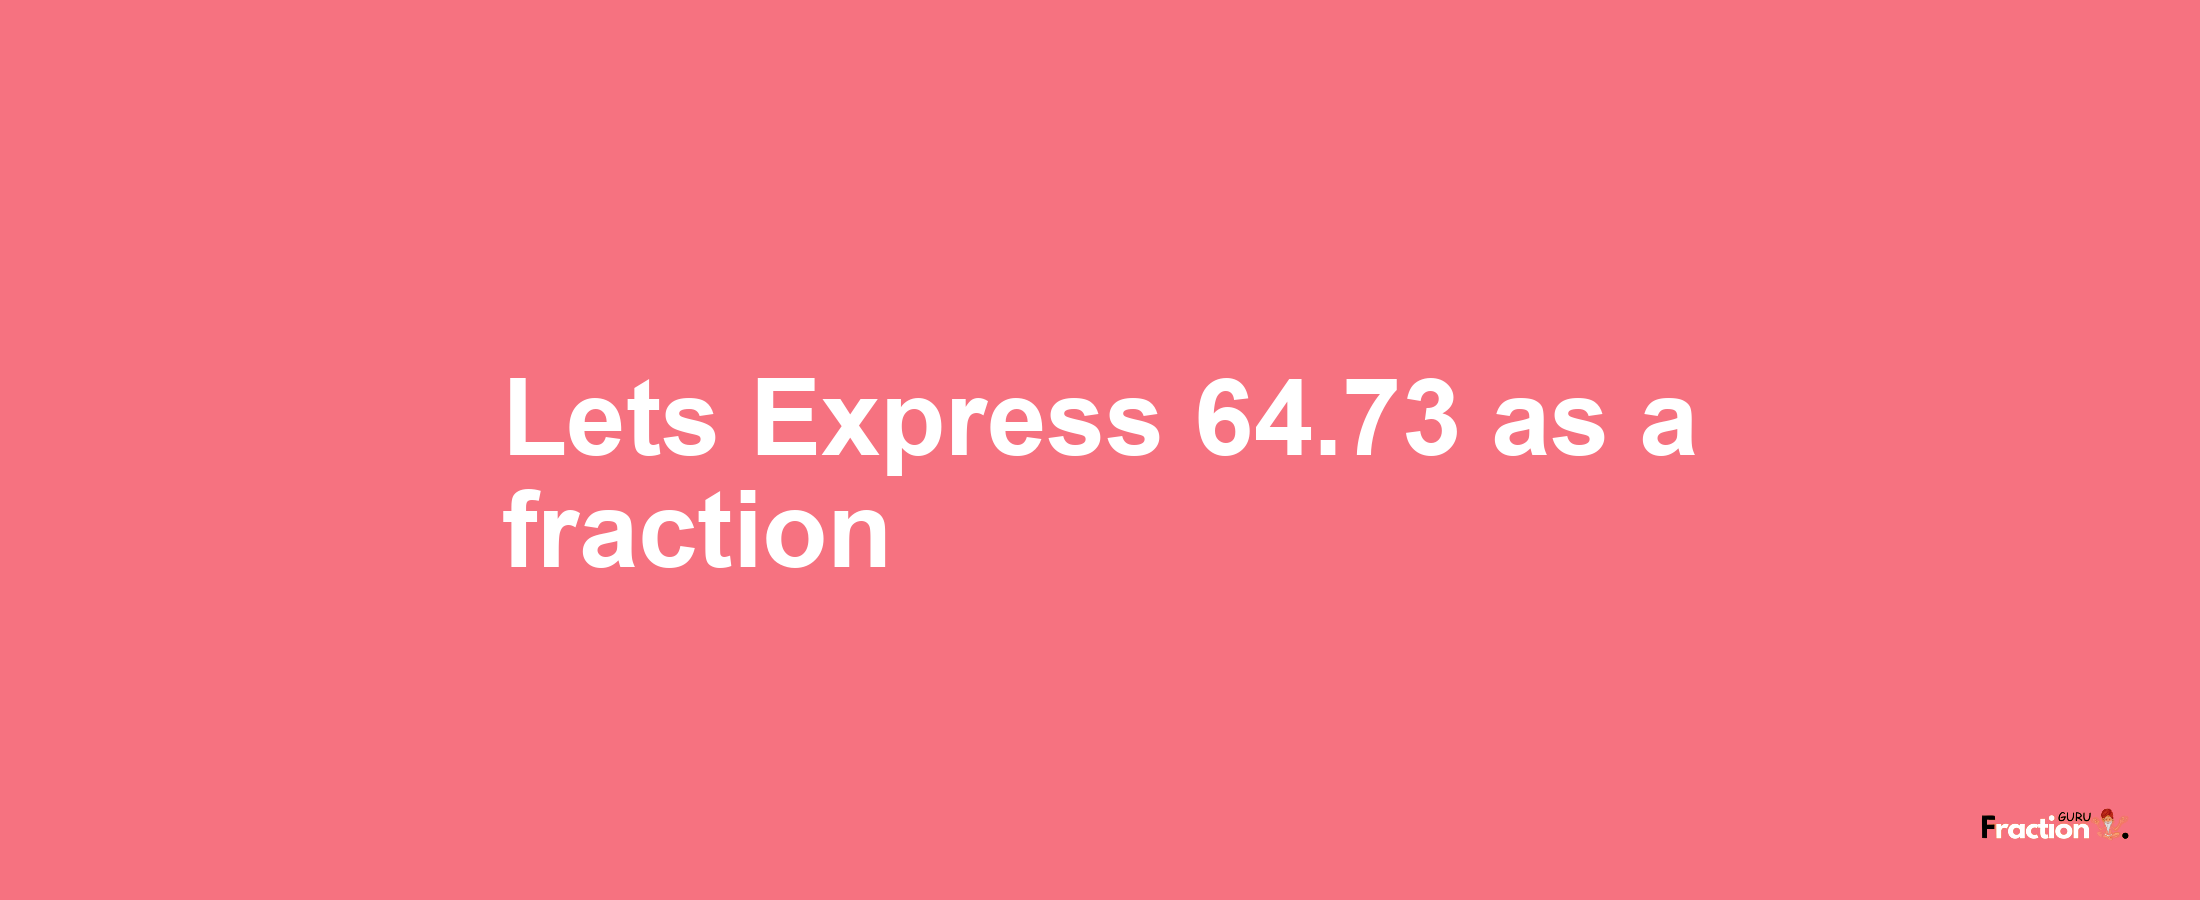 Lets Express 64.73 as afraction